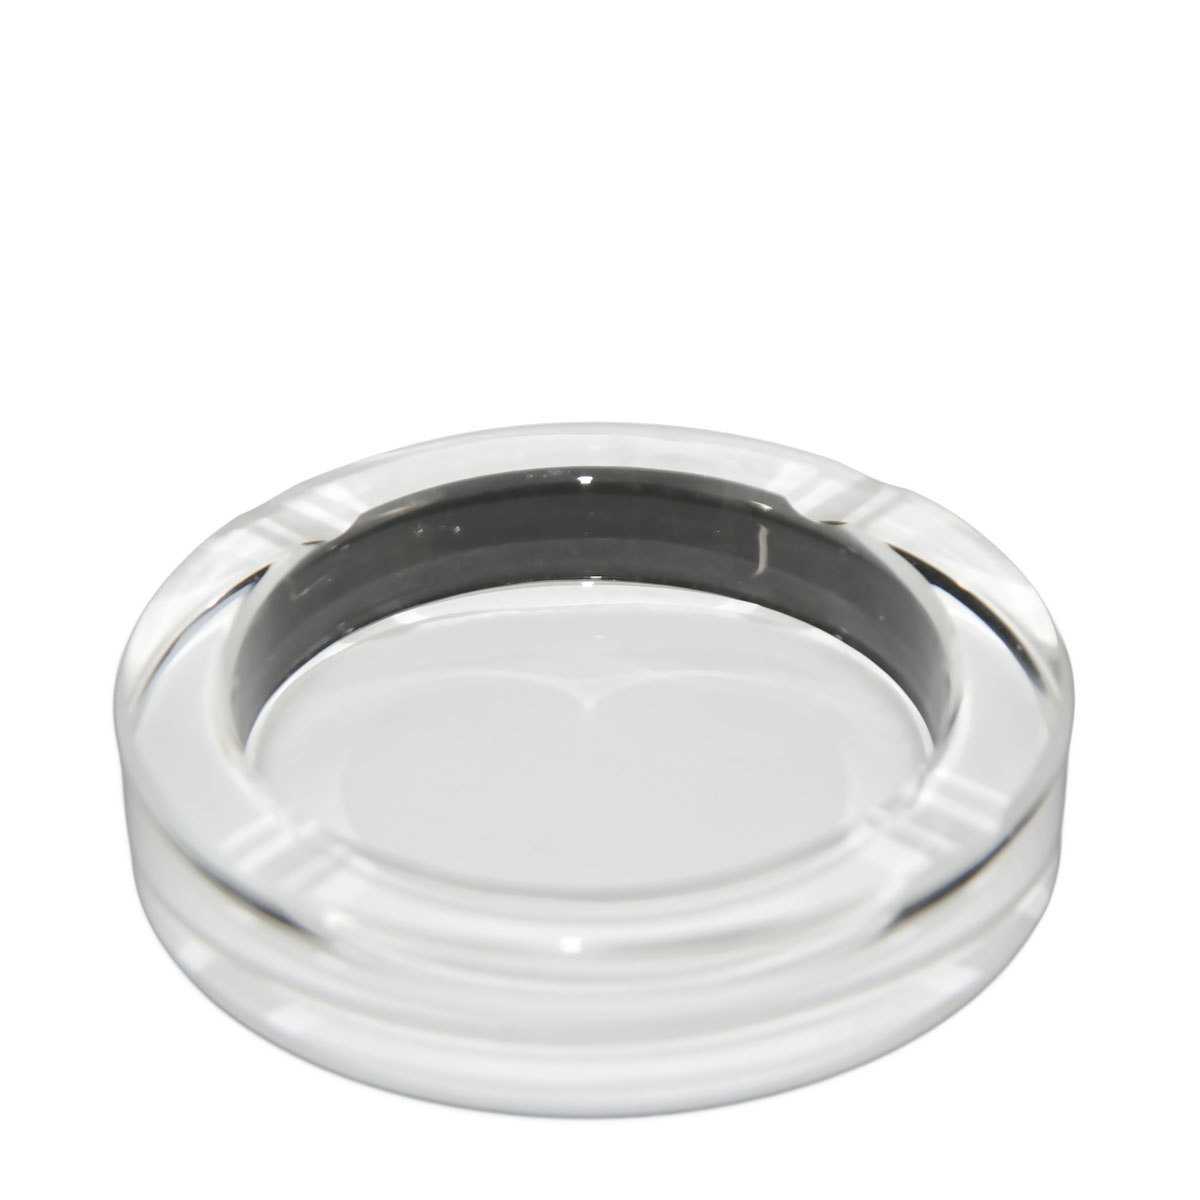 Glass ashtray for sublimation